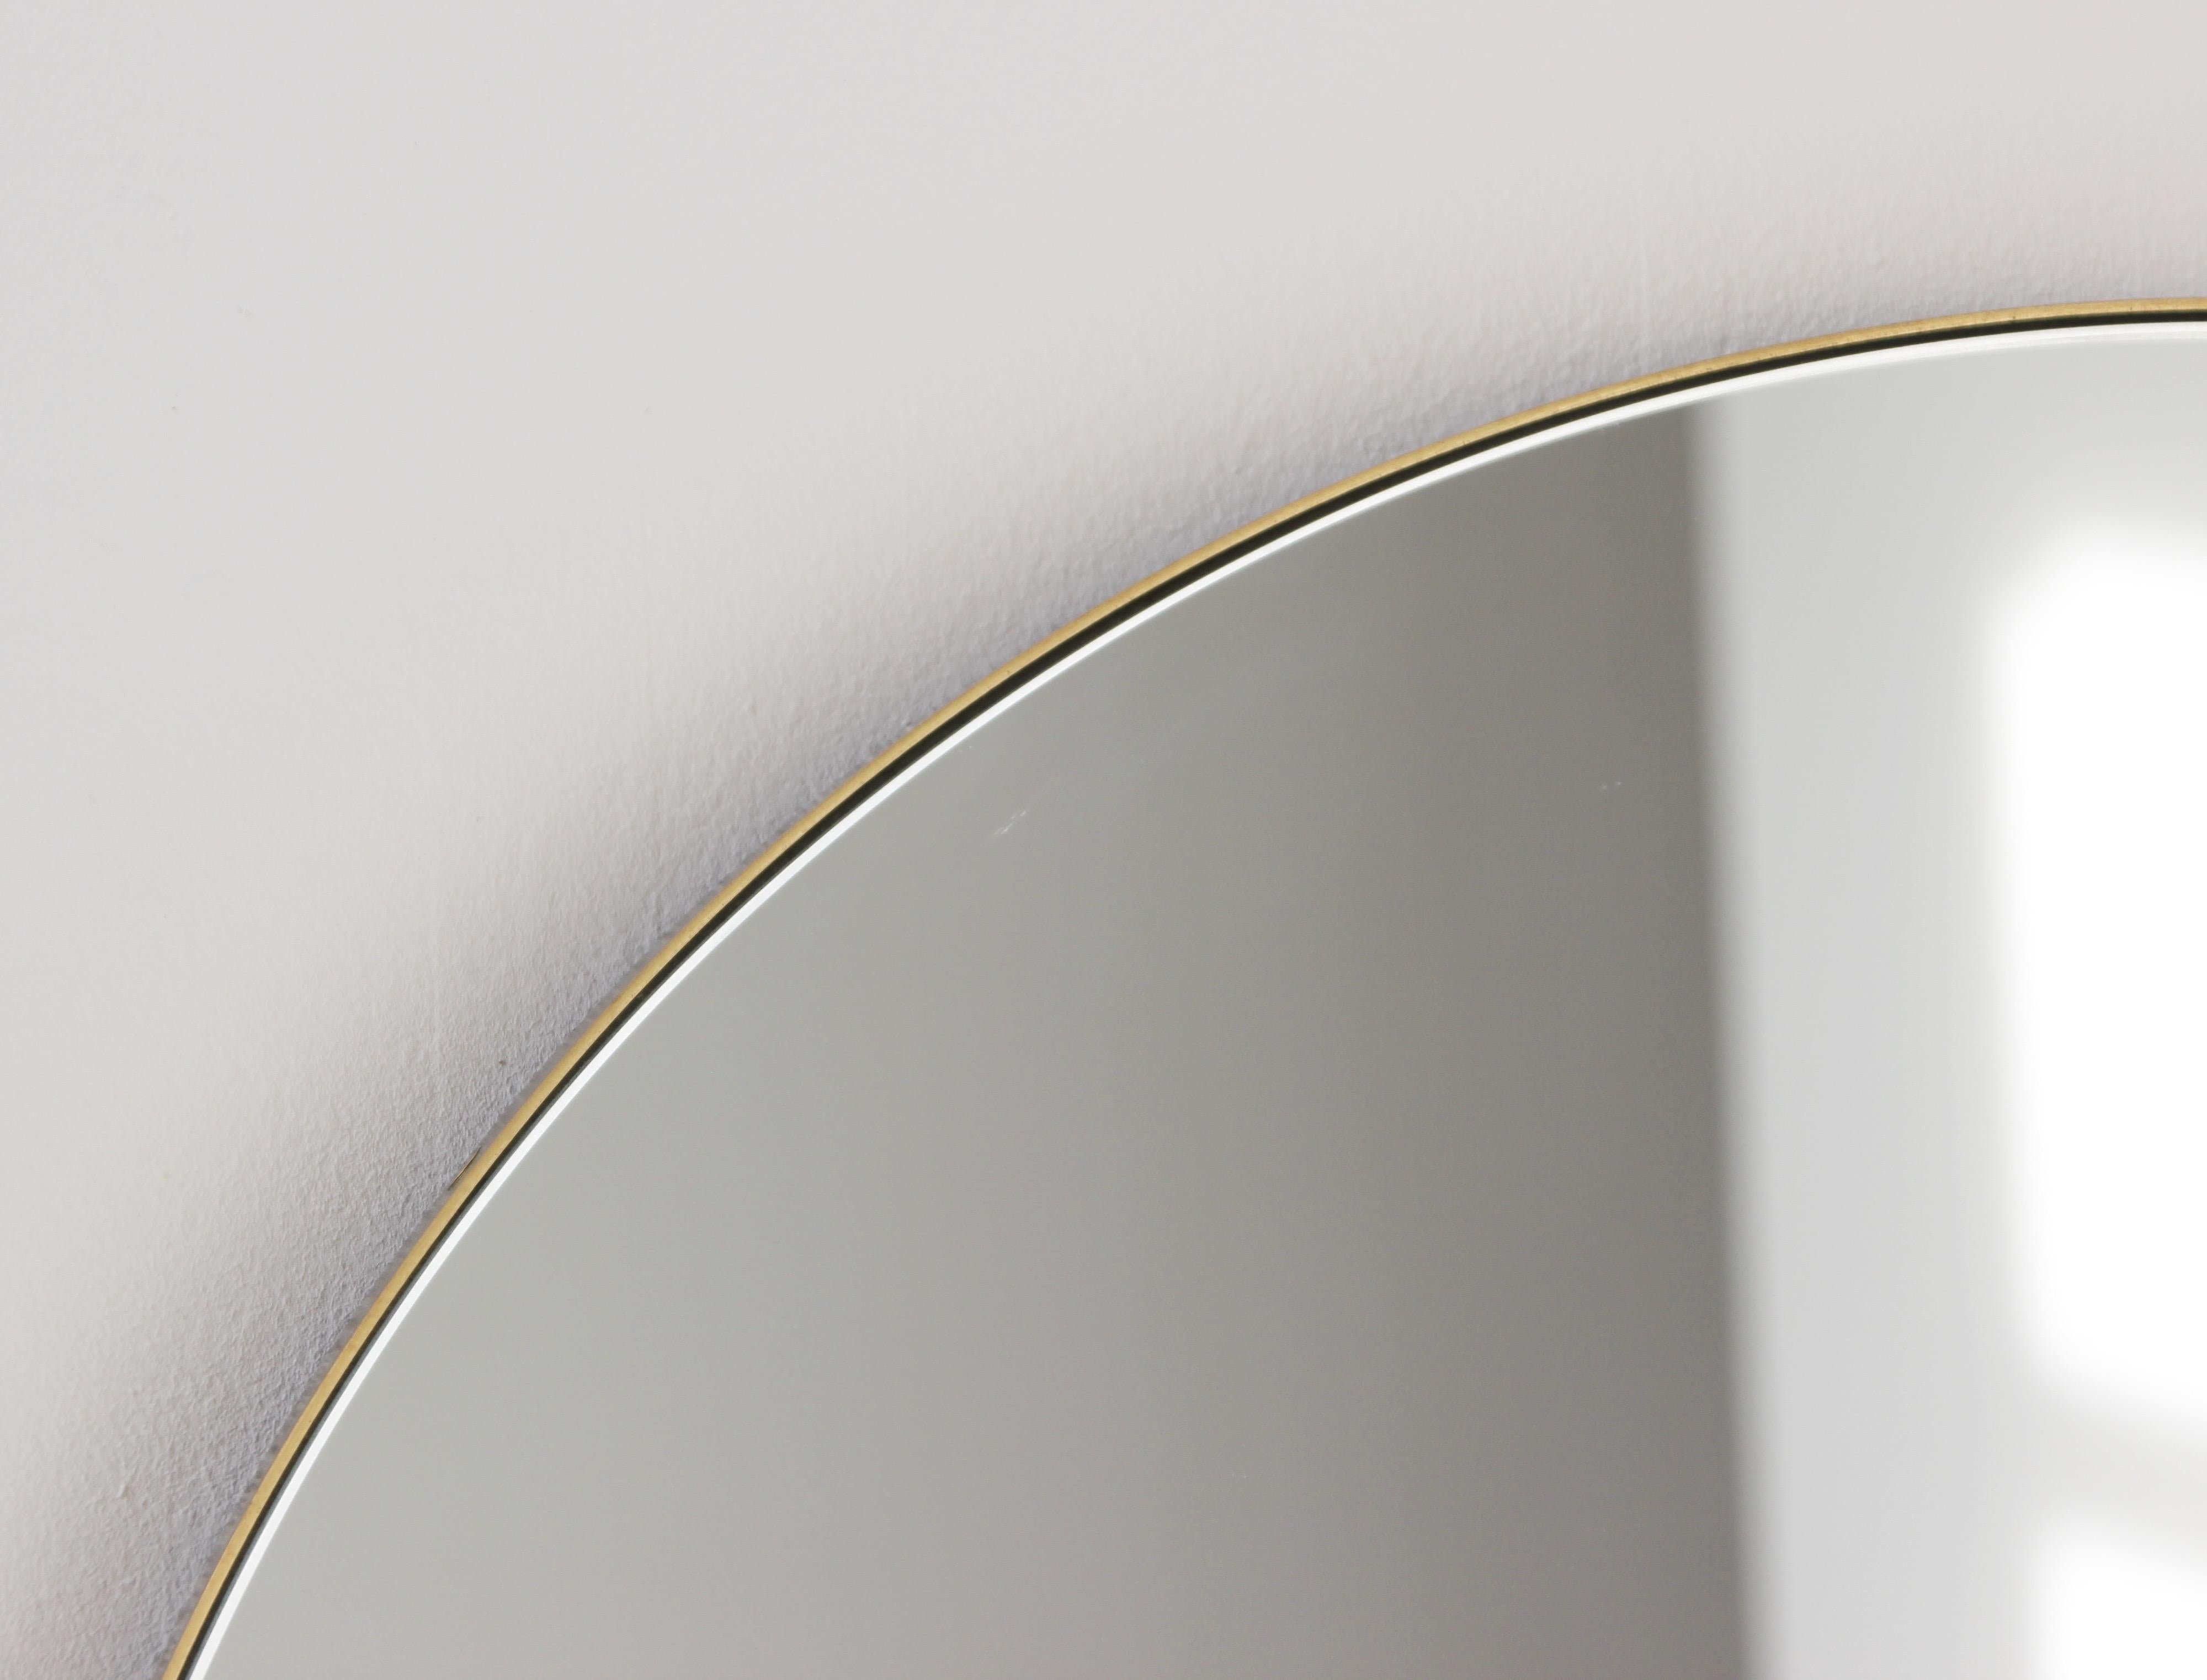 Orbis Round Minimalist Contemporary Mirror with Brass Frame, Small In New Condition For Sale In London, GB